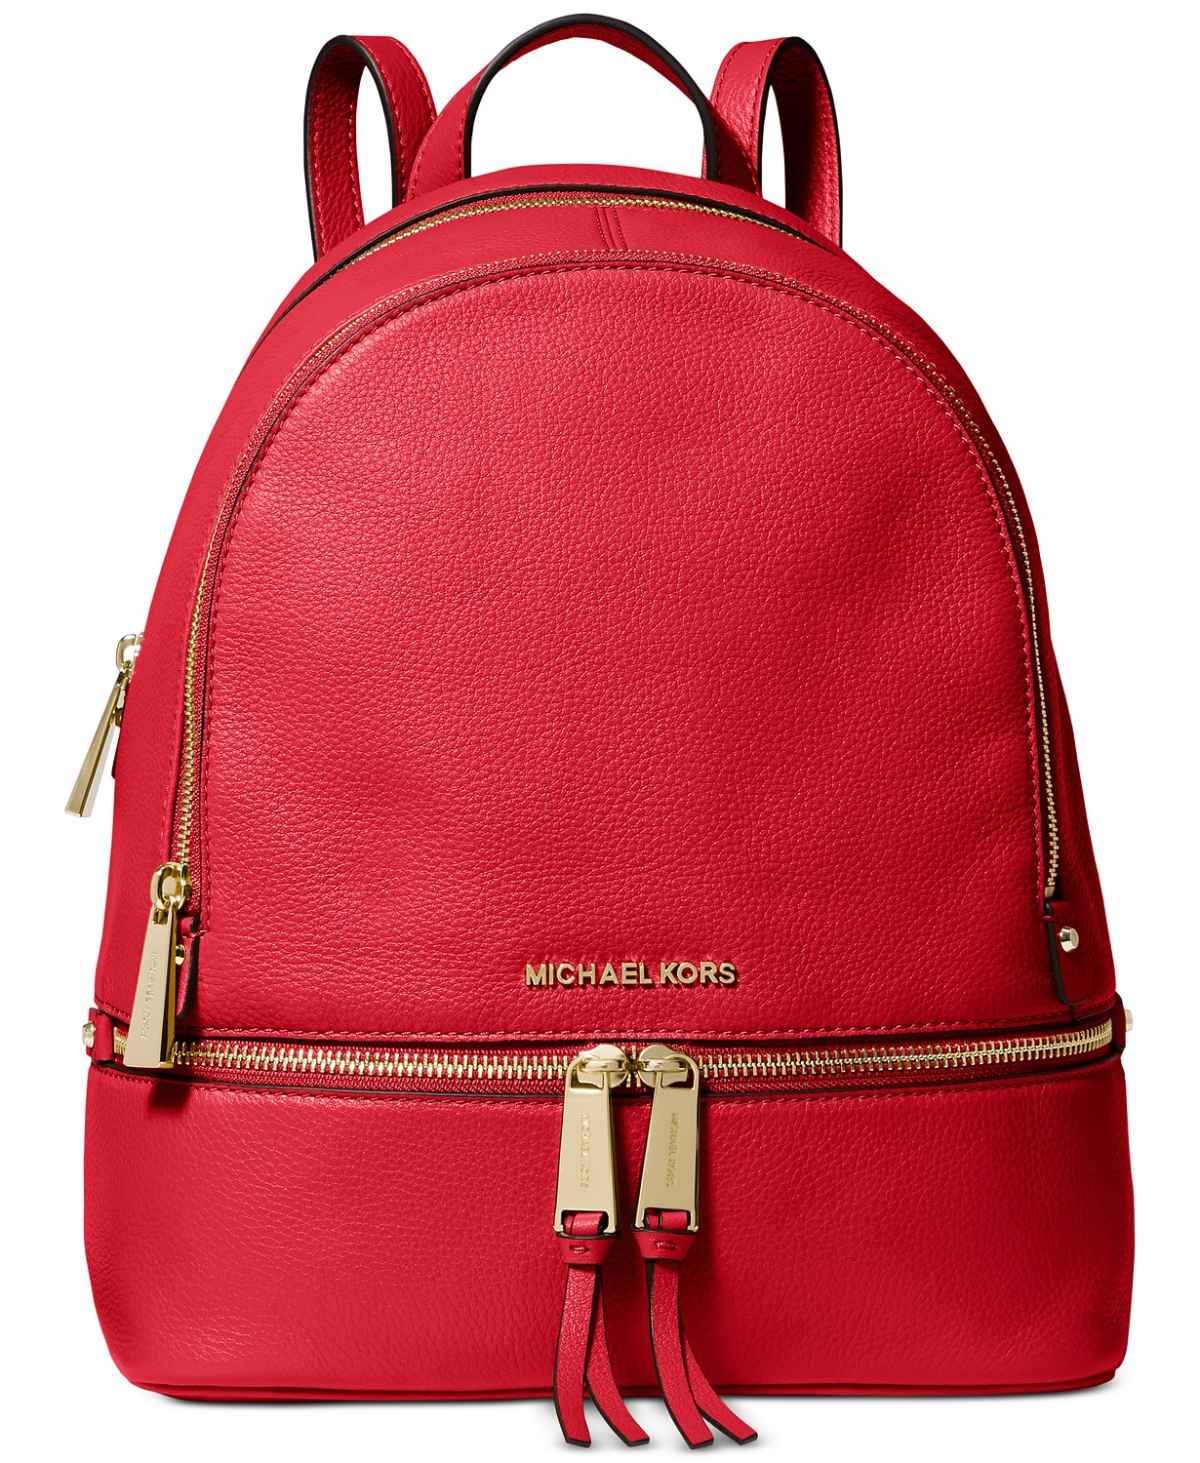 Michael Kors Backpack and Totes for just $95.20 shipped (Reg. $498), plus  more!